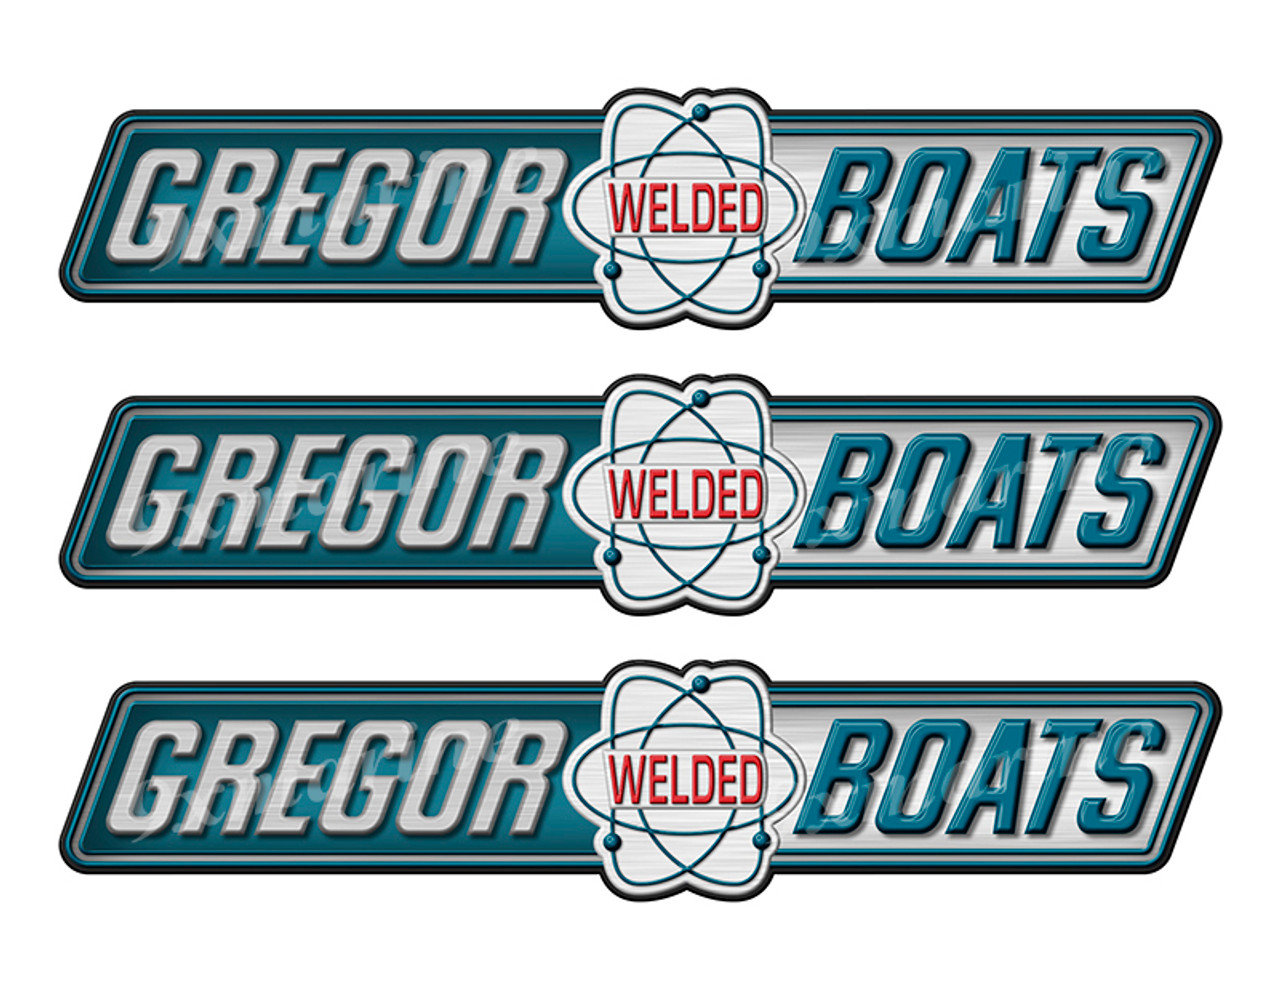 Gregor boat stickers. Replace your boat maker stickers